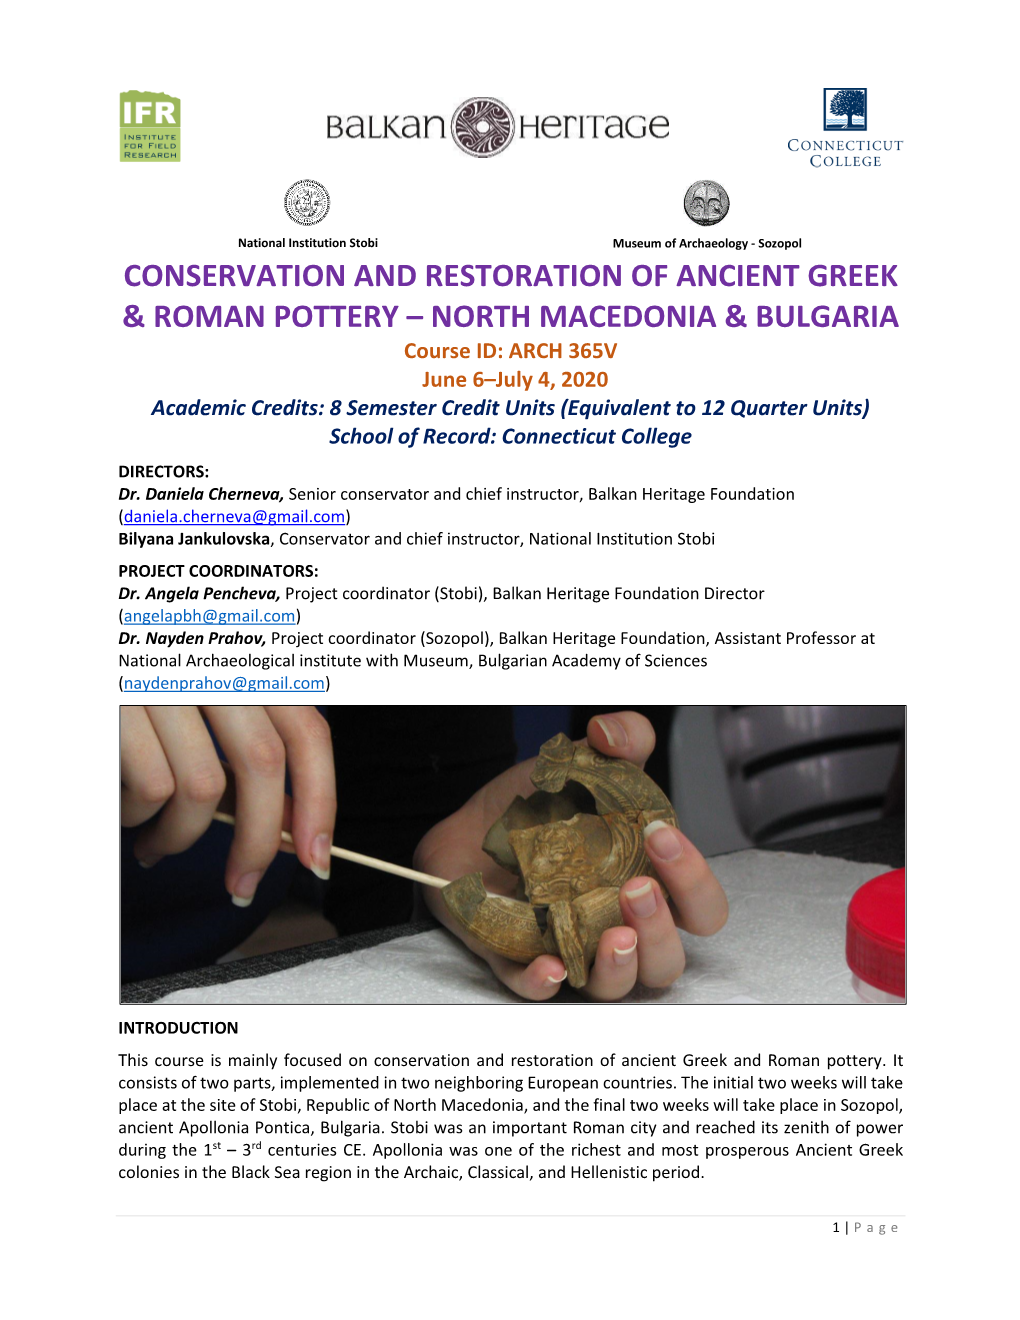 Conservation and Restoration of Ancient Greek & Roman Pottery